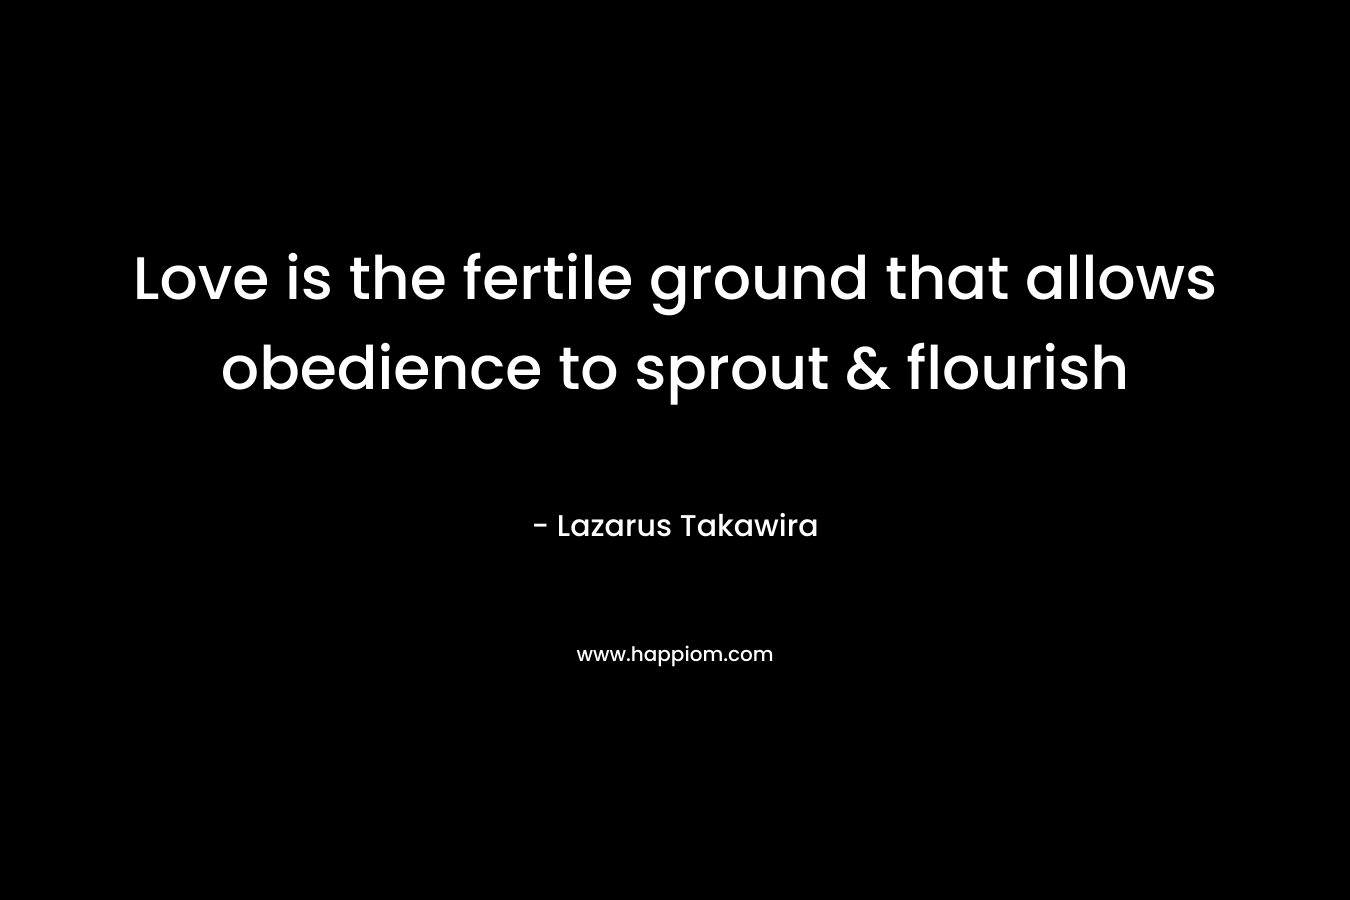 Love is the fertile ground that allows obedience to sprout & flourish